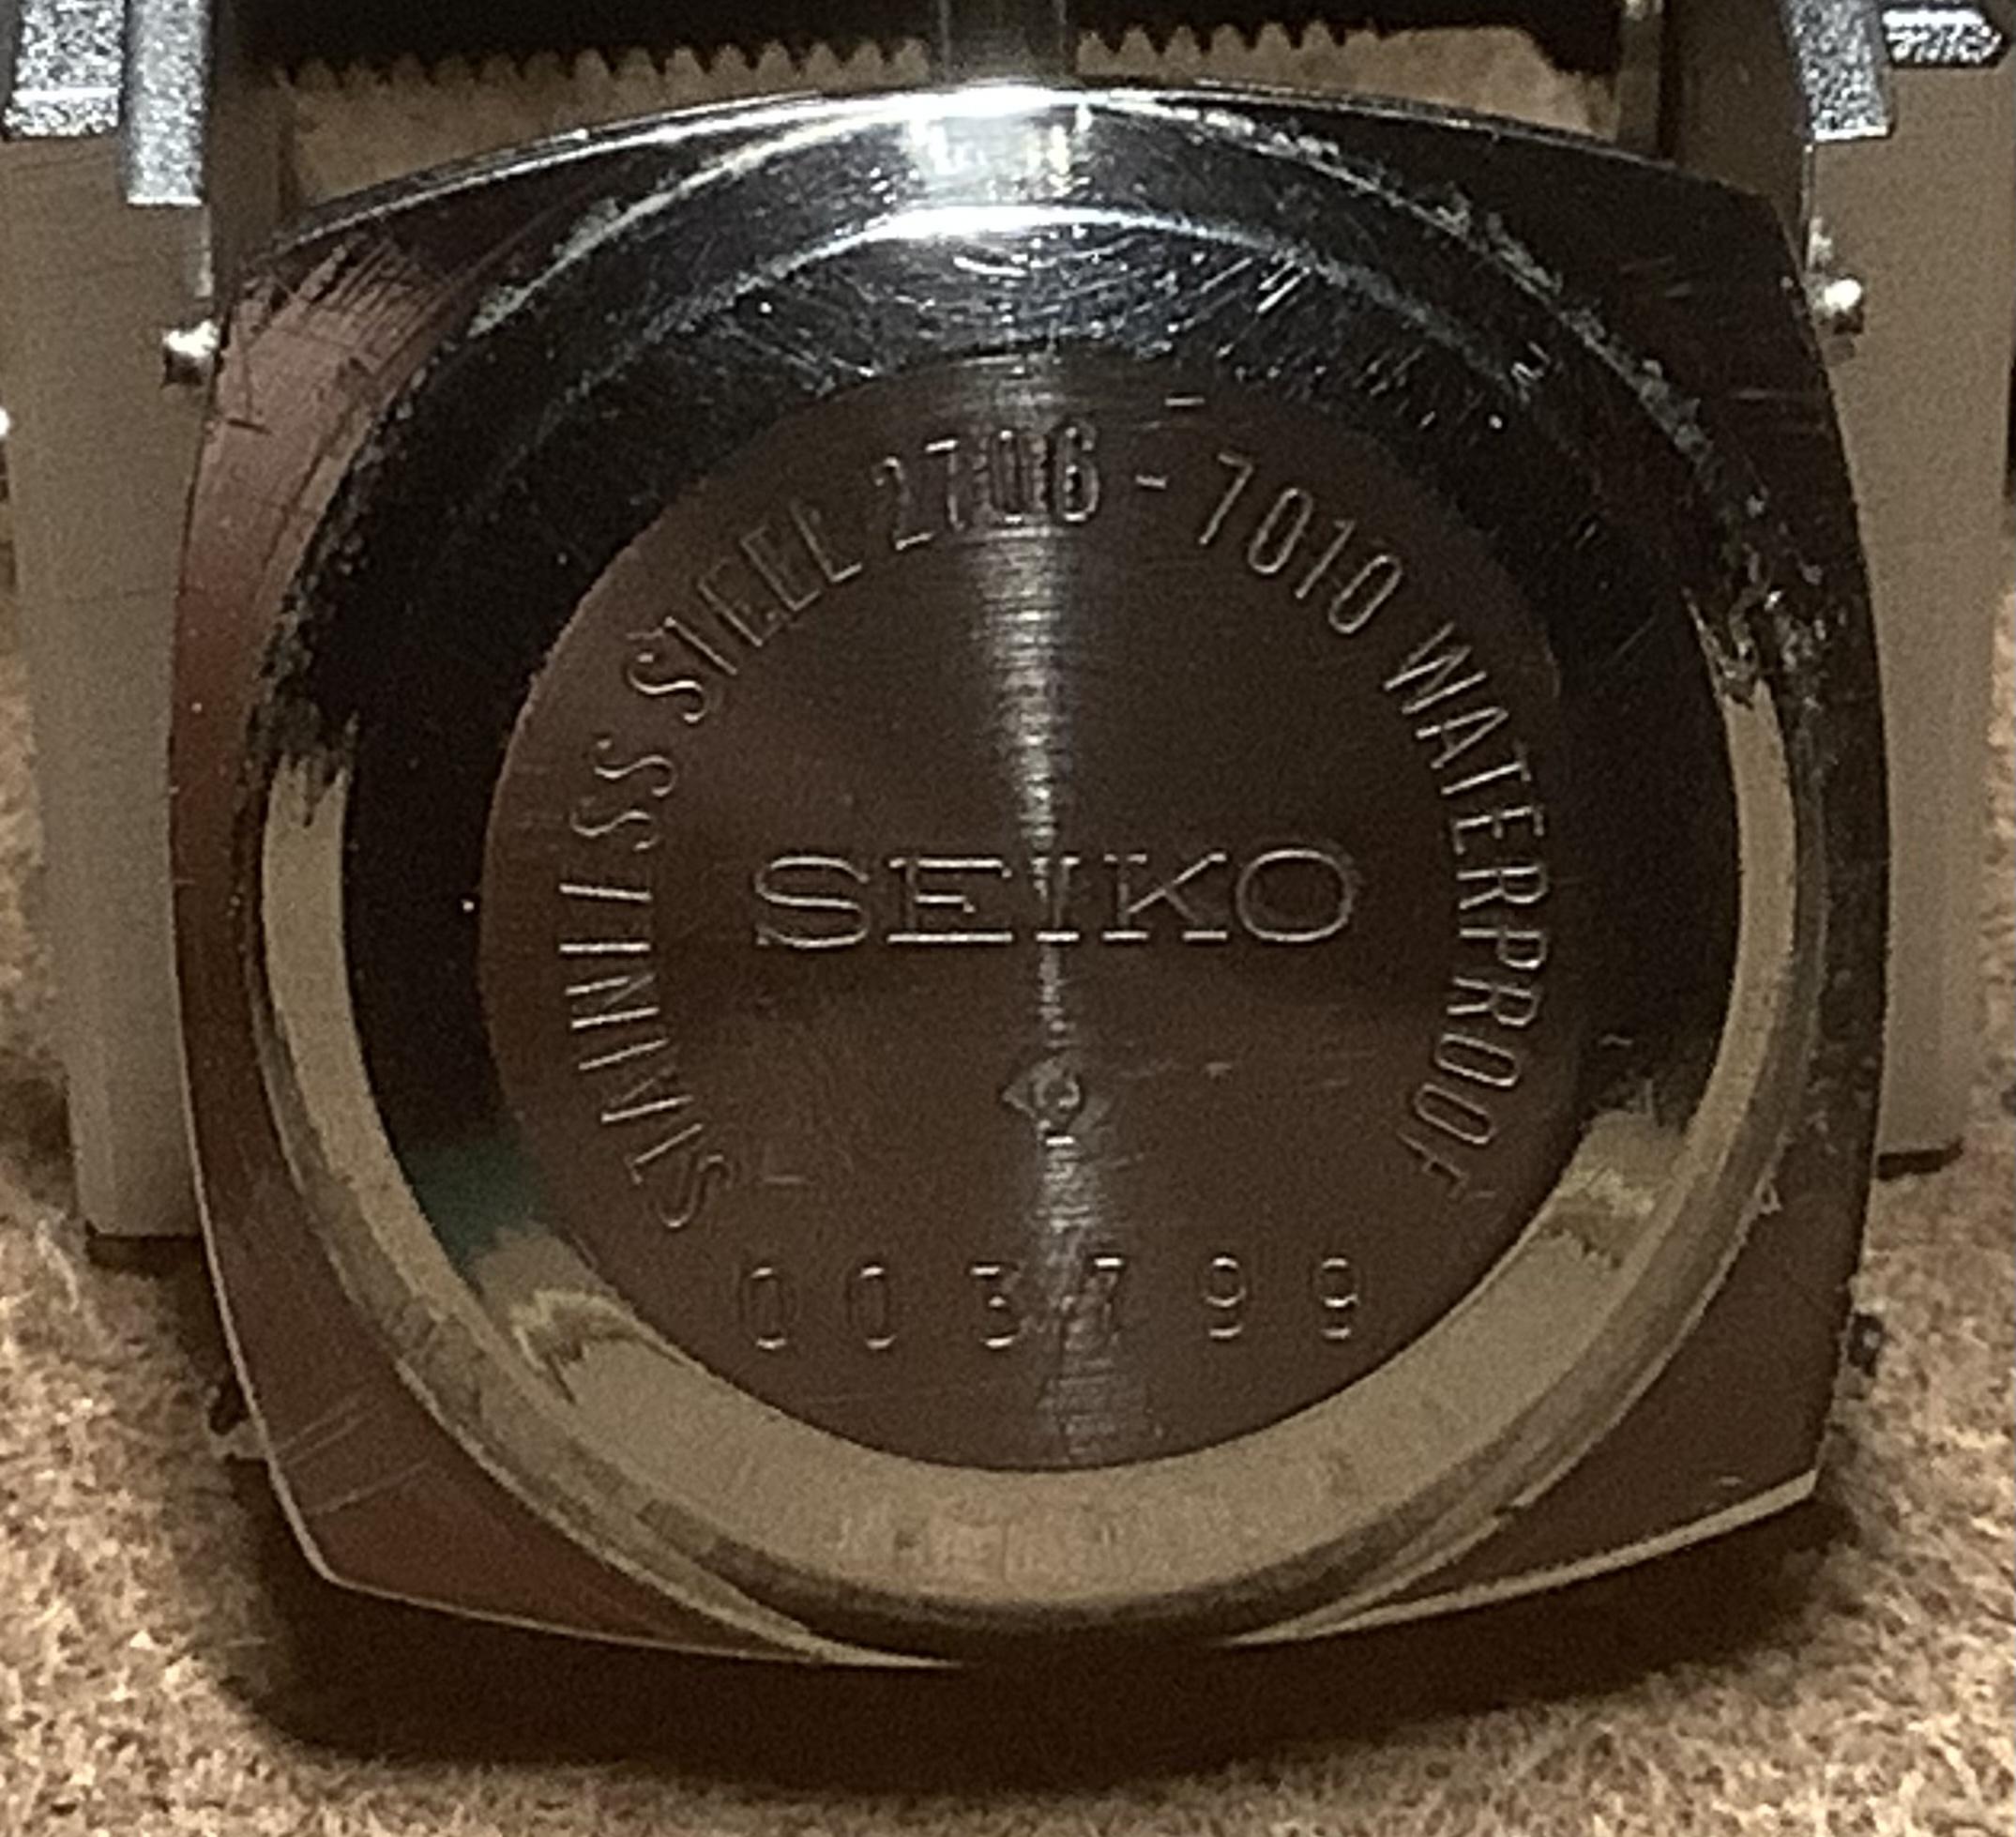 Seiko stem release lever - Watch Case Issues, Opening, Movement/Stem  Removal, Case Parts, straps and bracelets - Watch Repair Talk